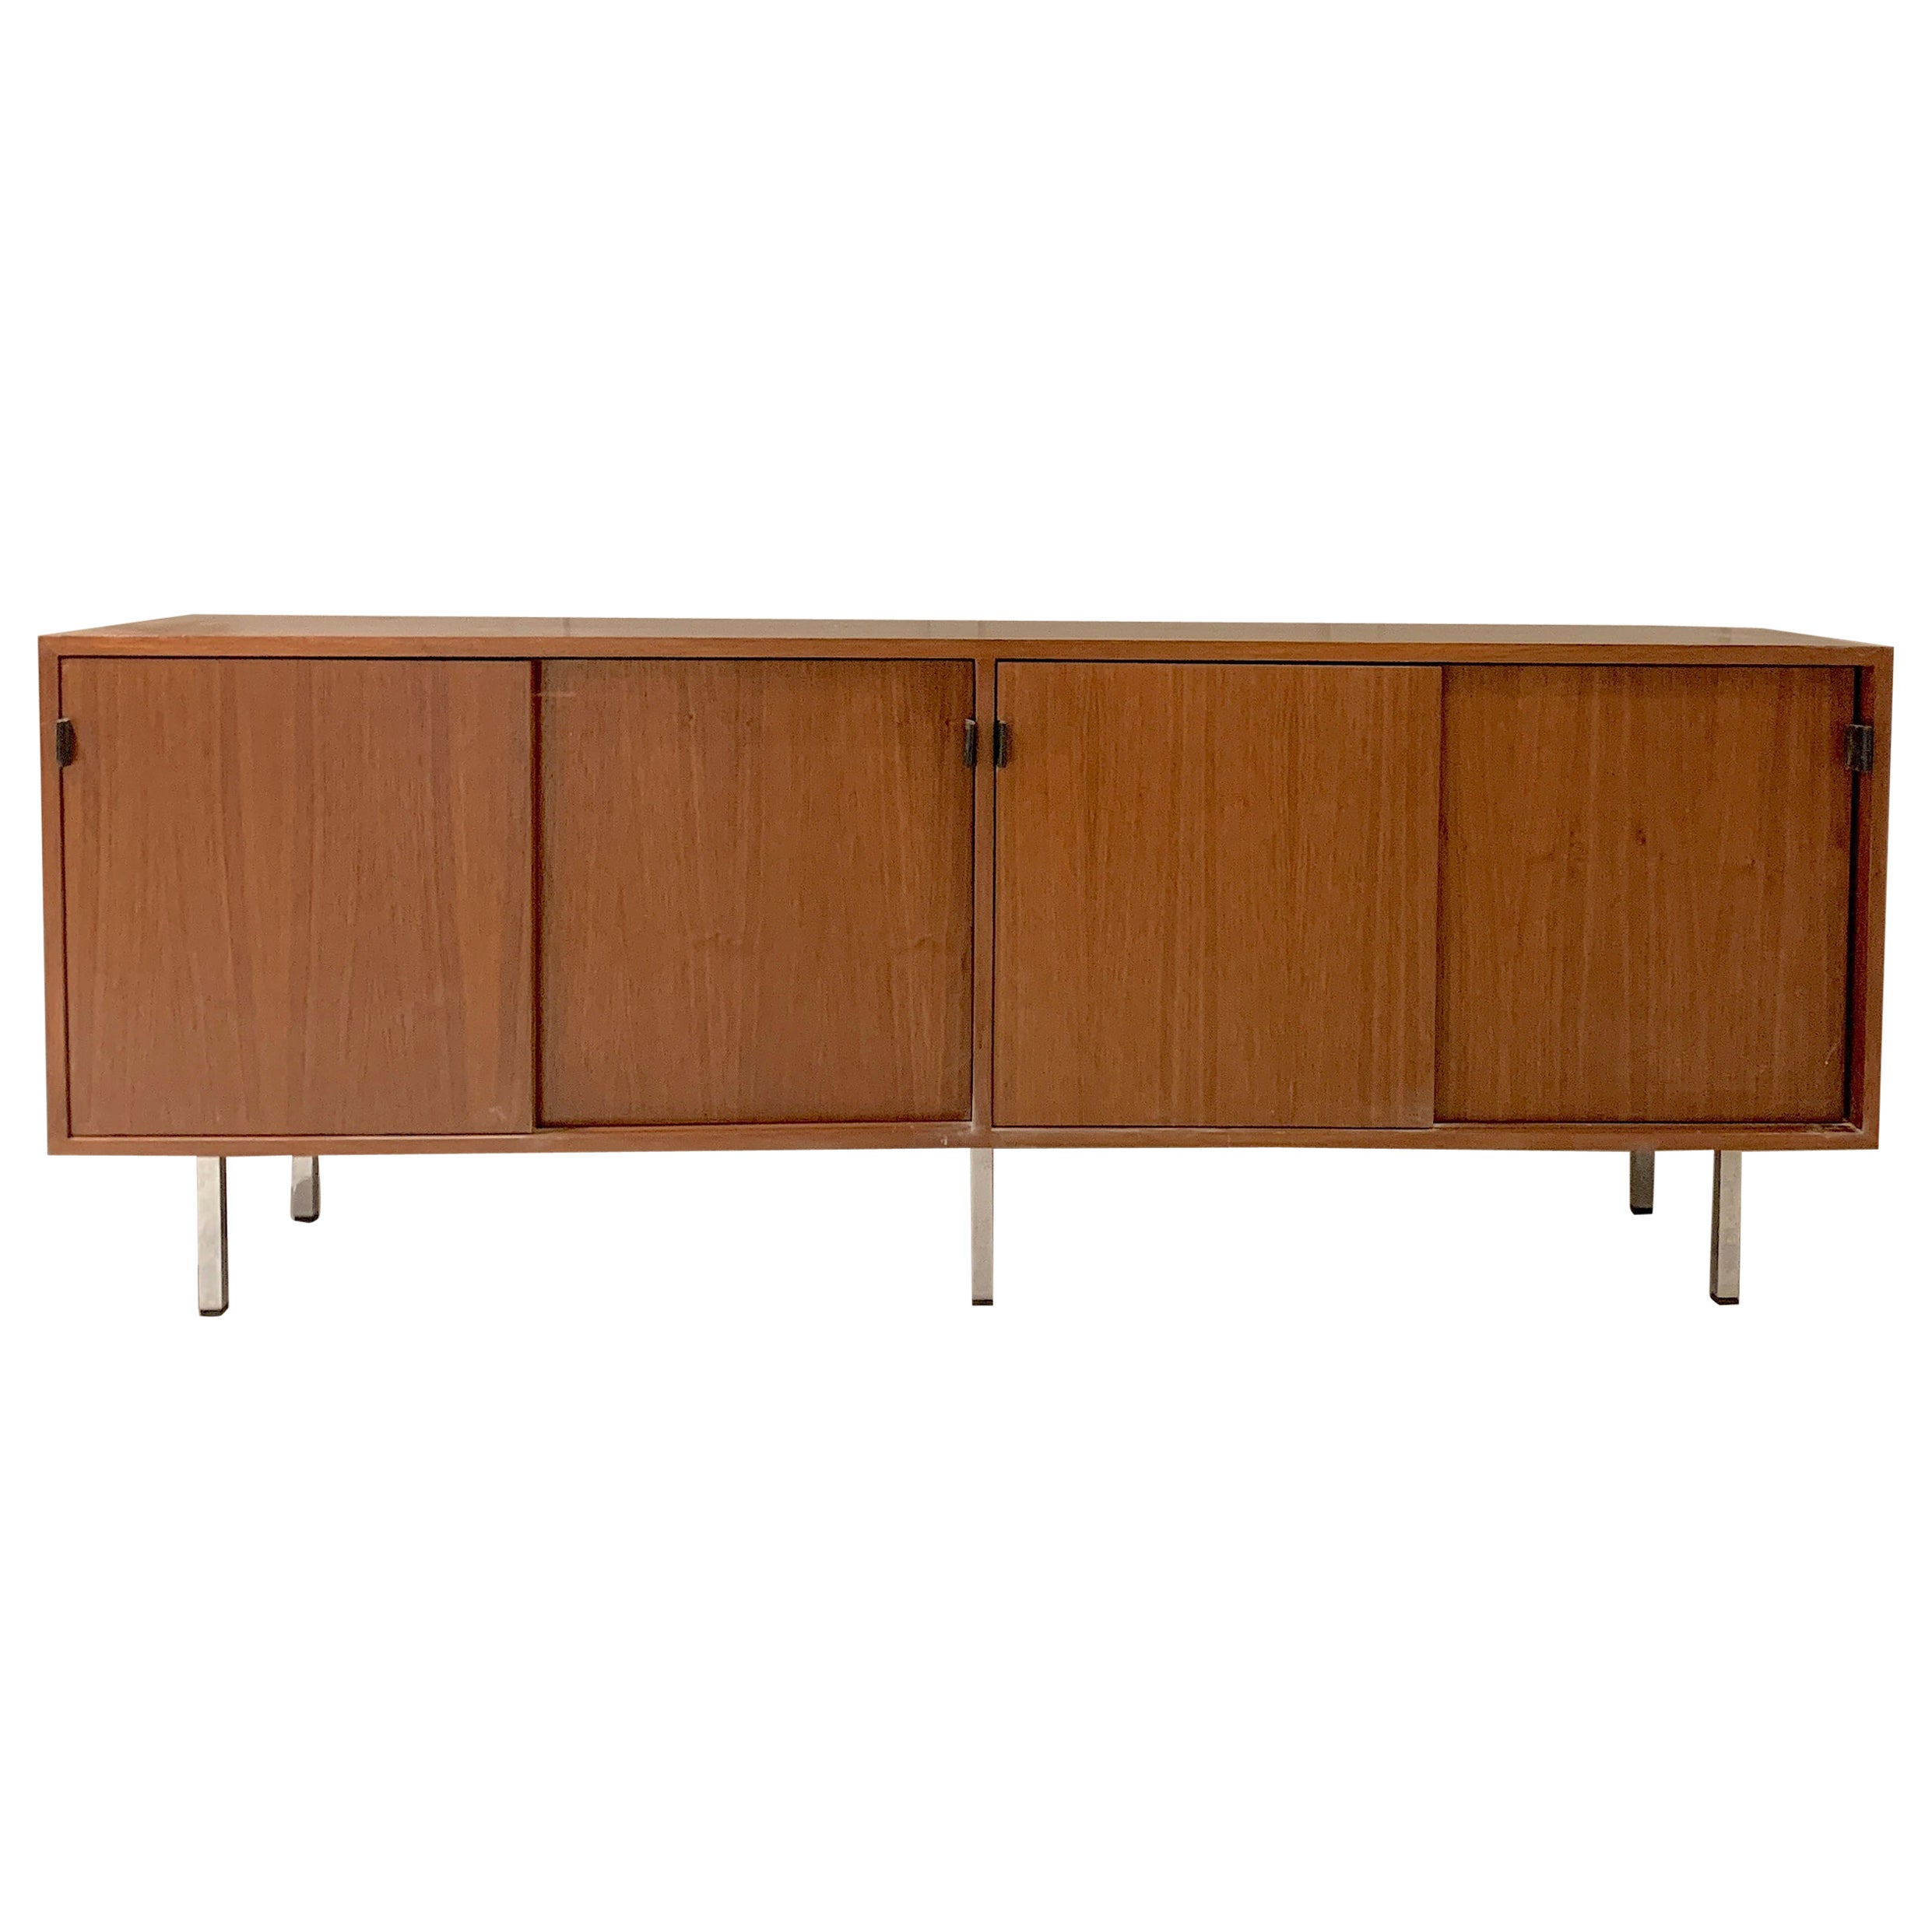 1960s Florence Knoll Credenza an Authentic Mid-Century Modern Classic - SALE!!